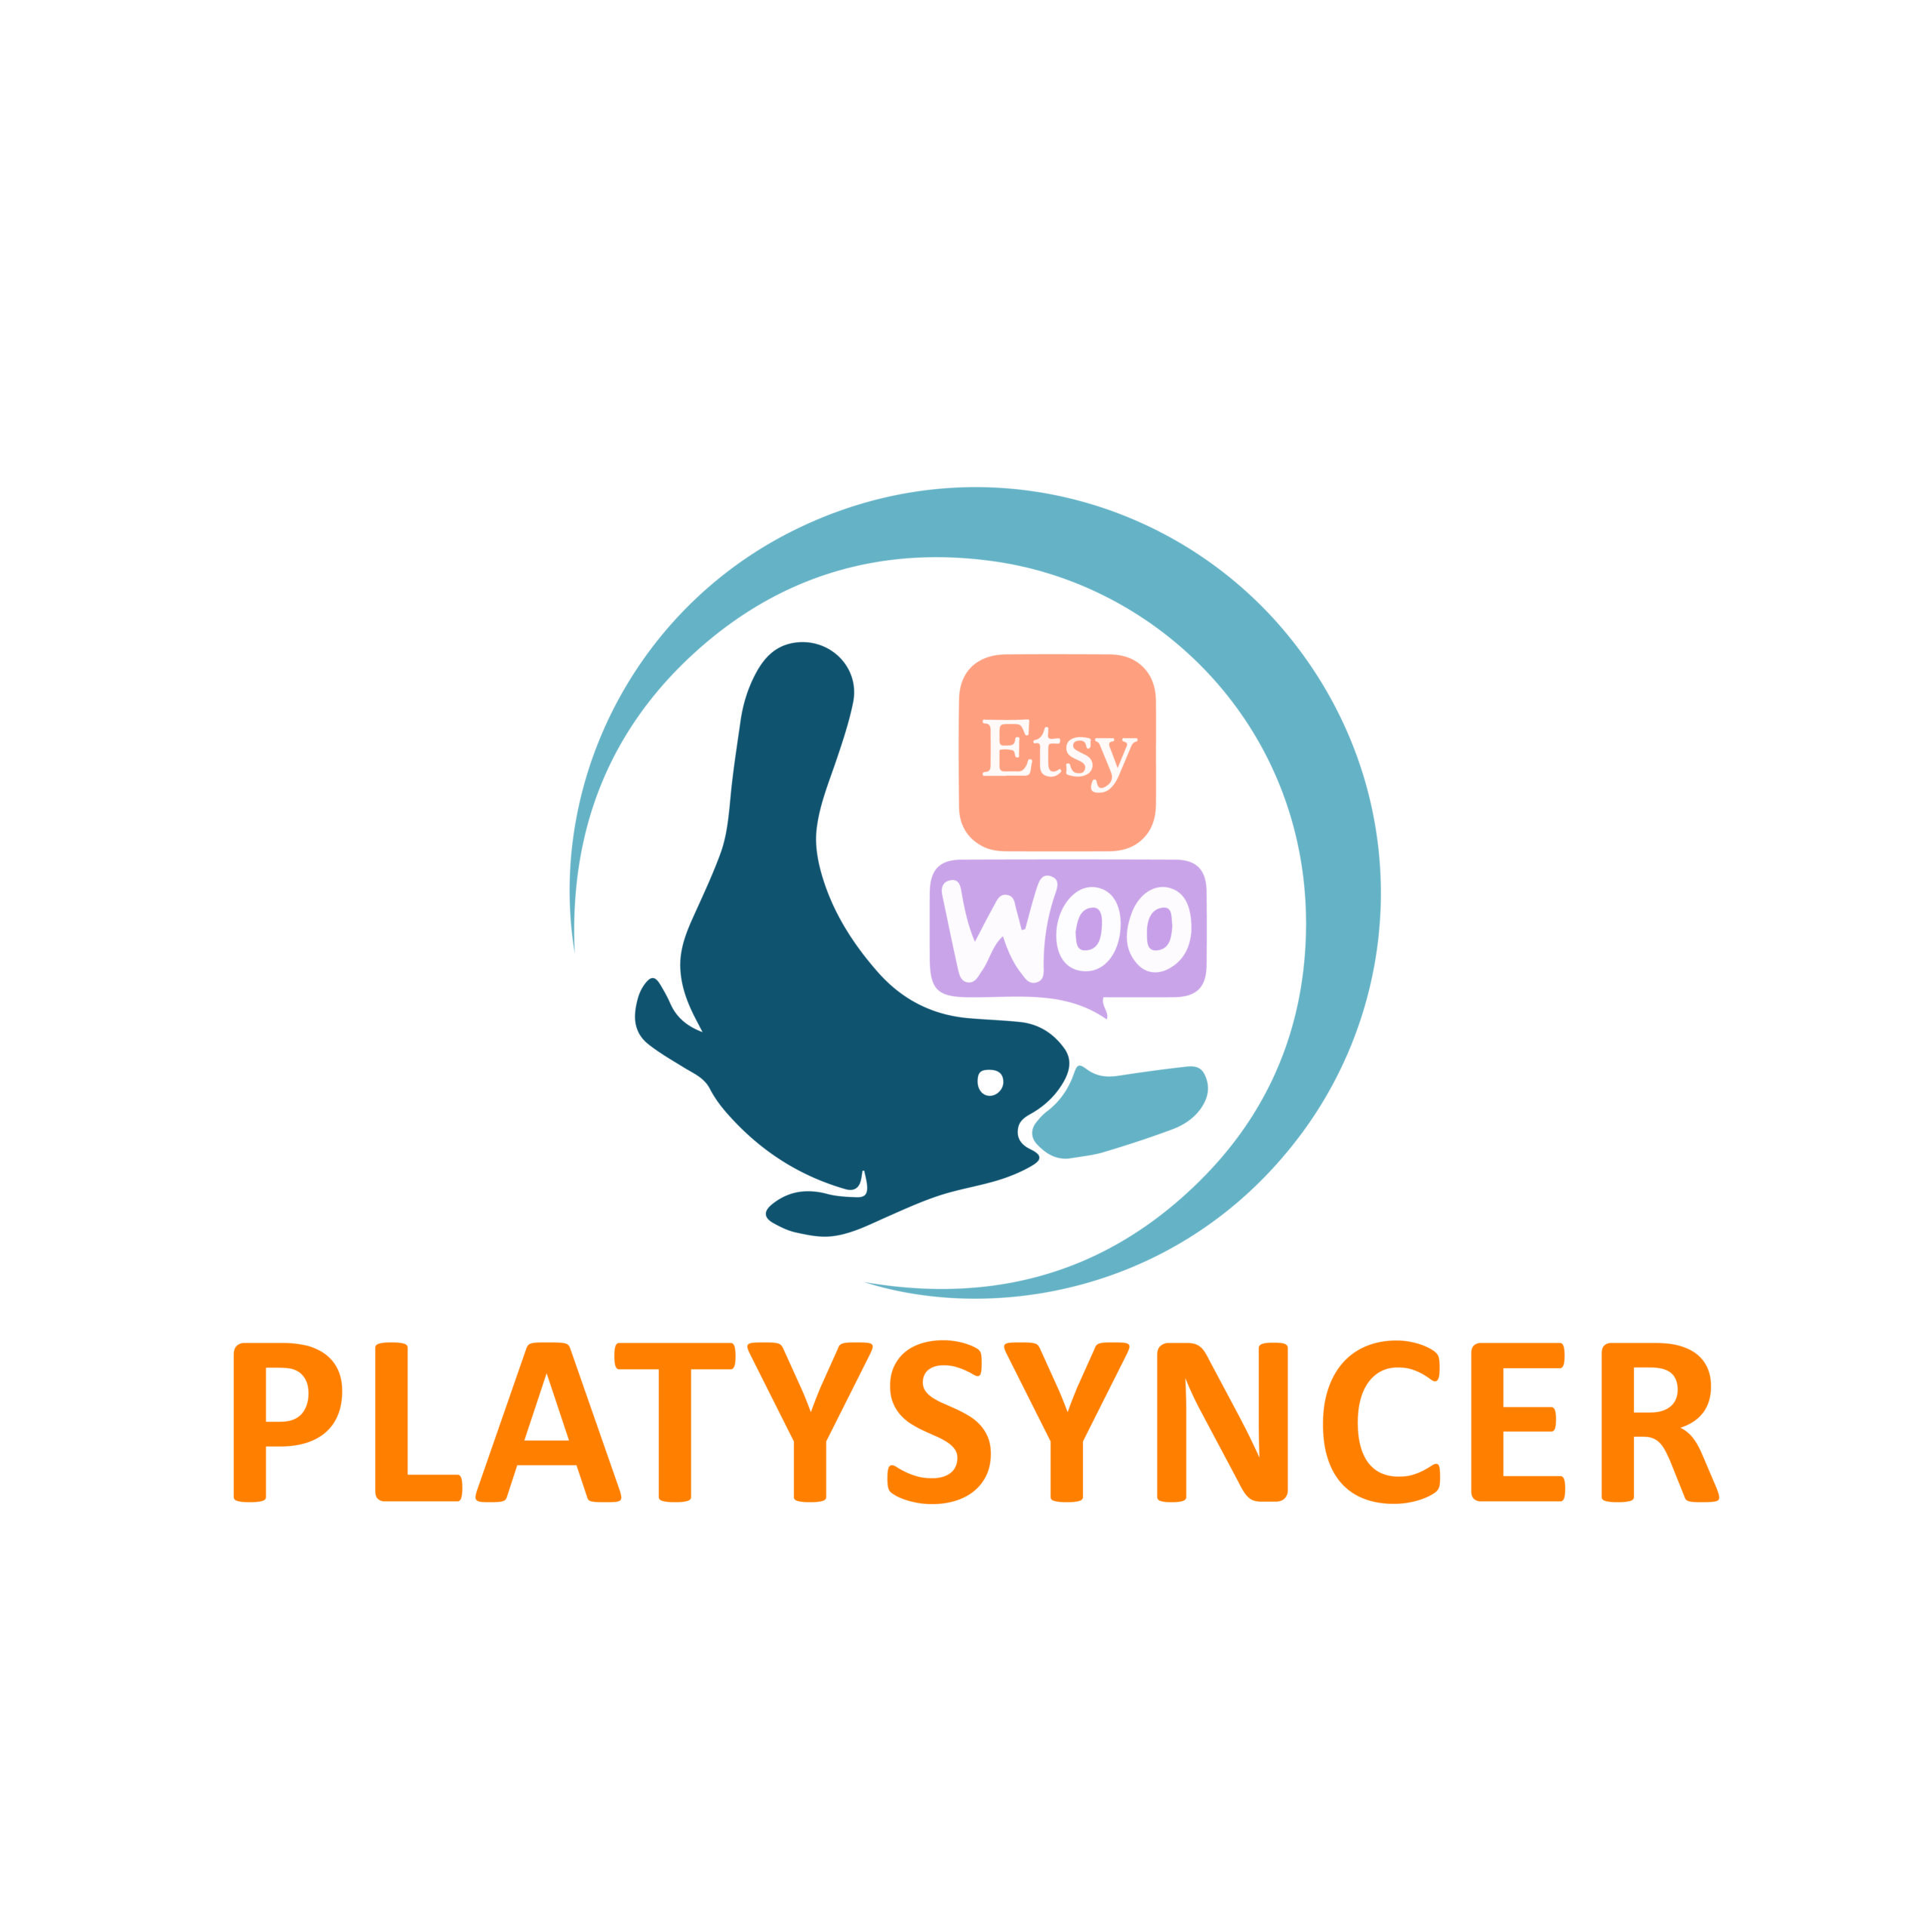 Platy Syncer for Etsy